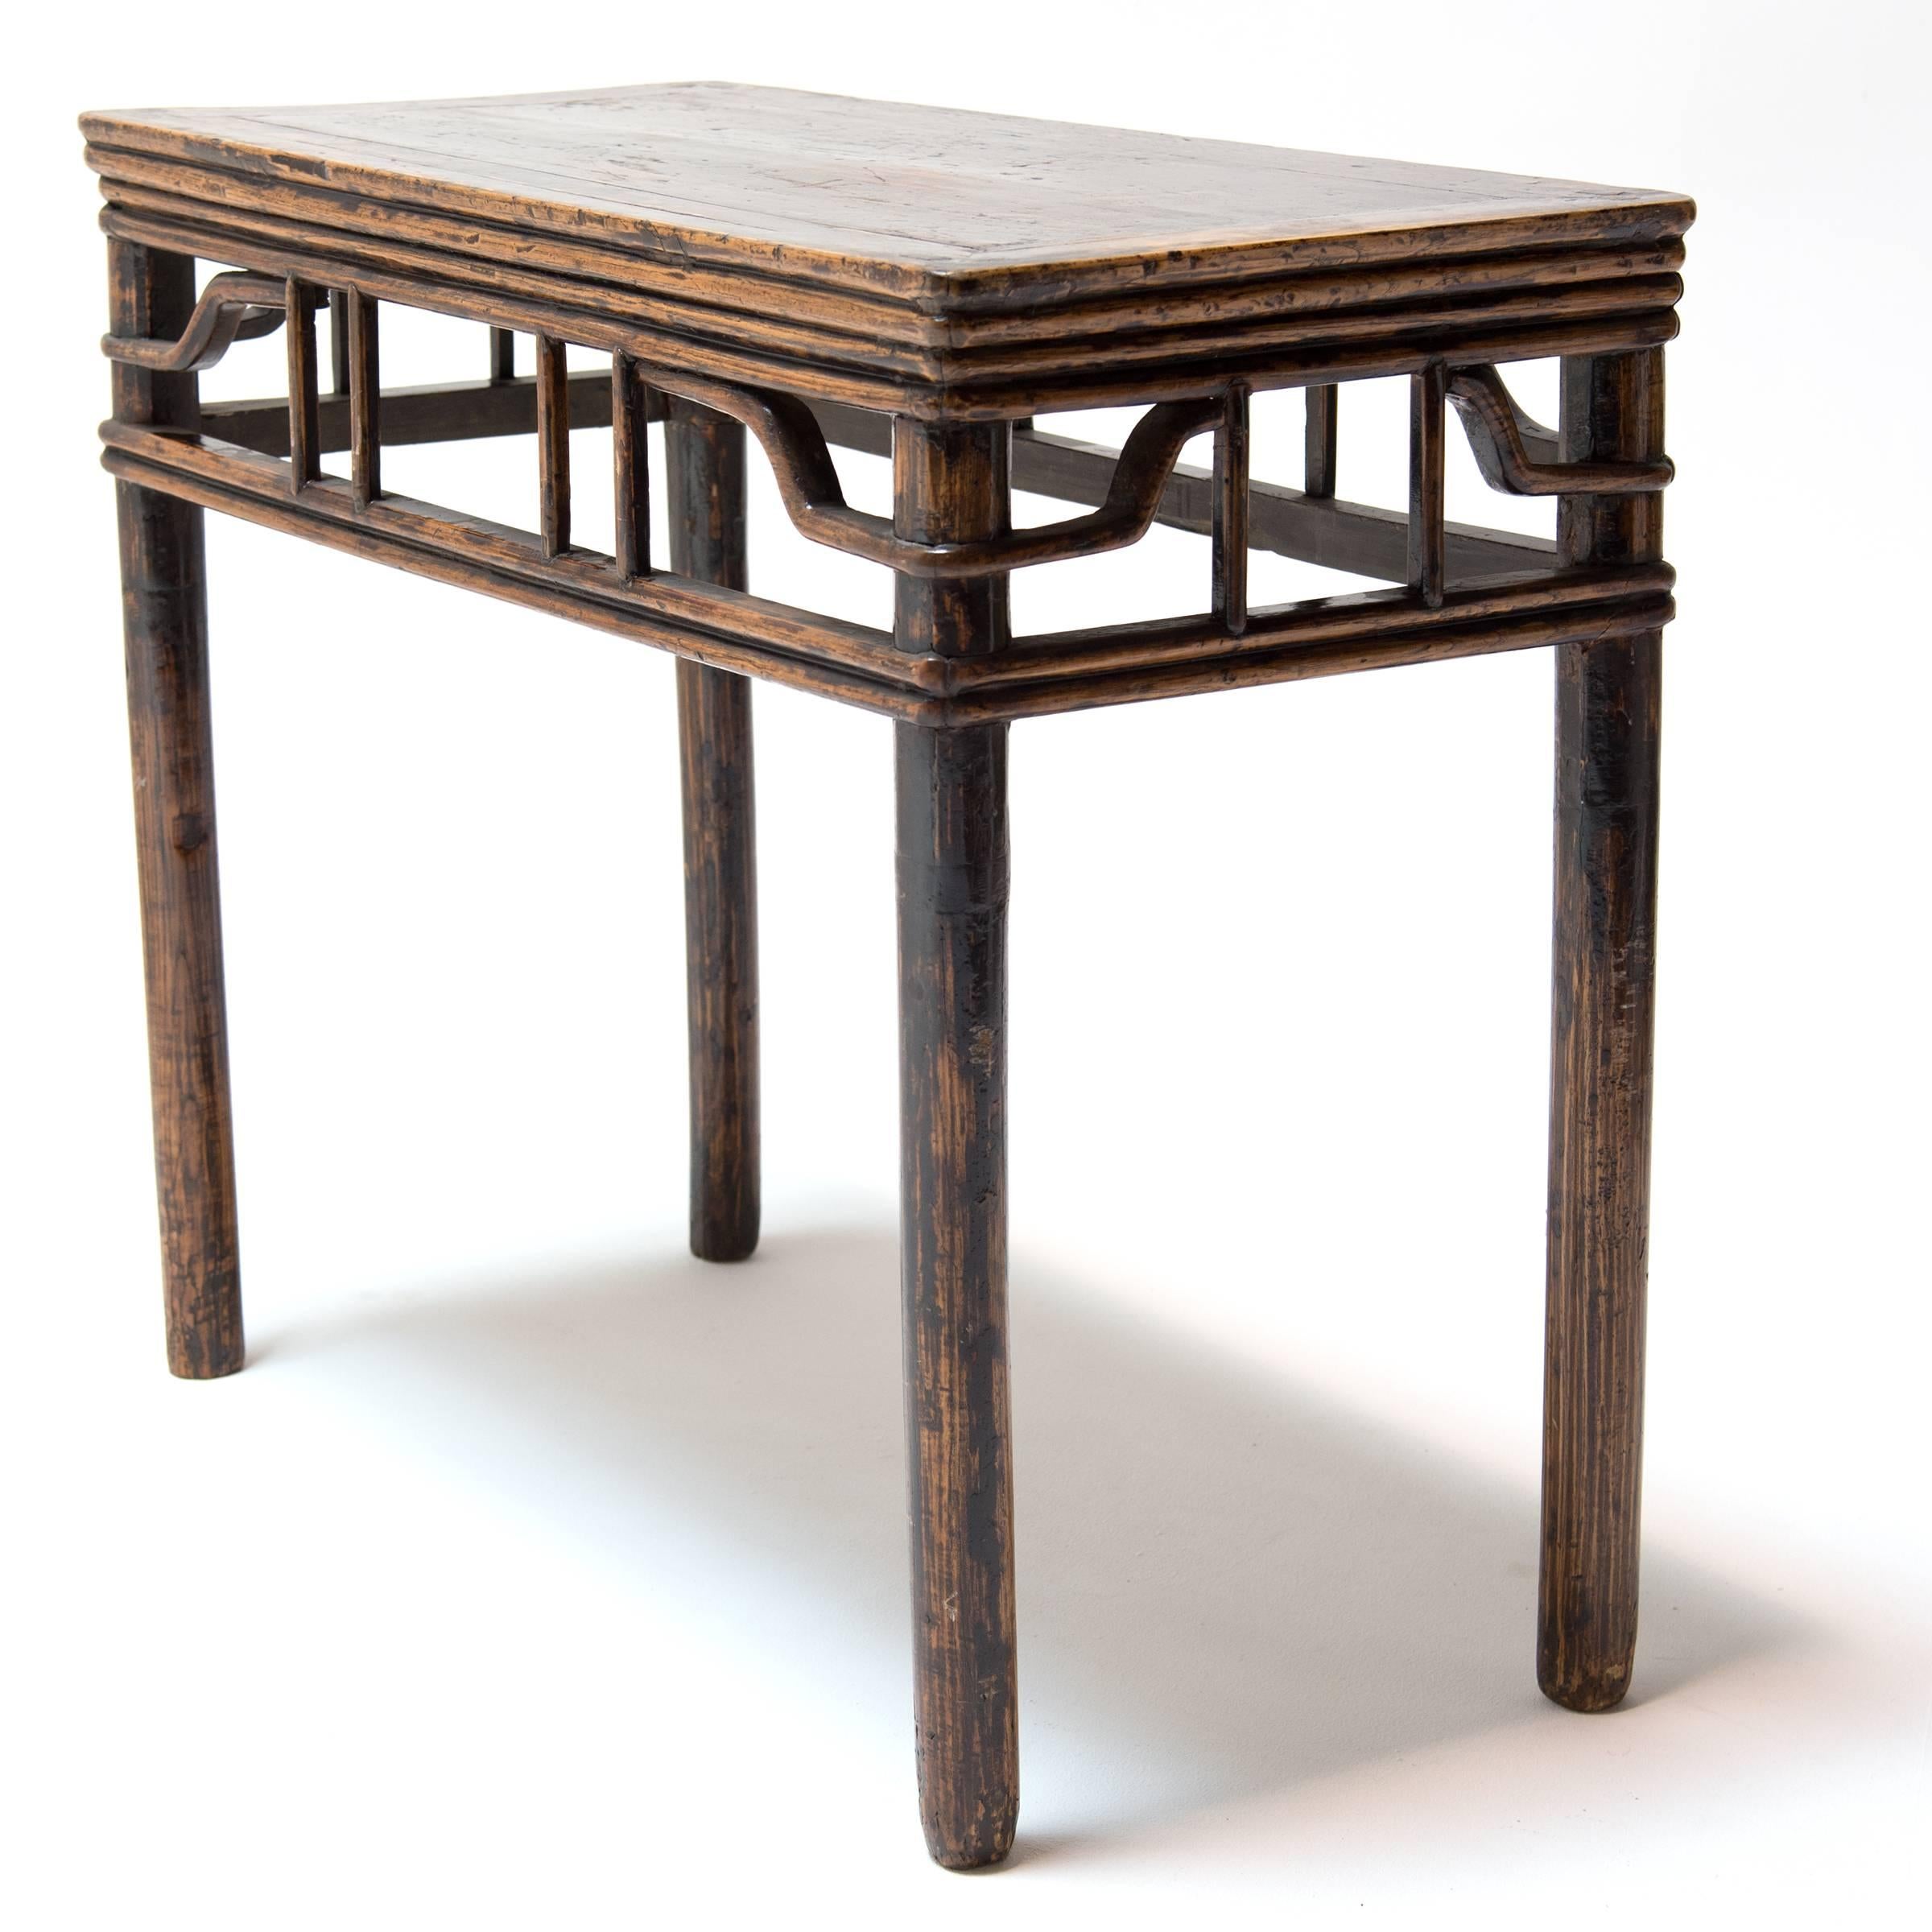 This 19th century side table hand-crafted in China’s Shanxi Province has an understated beauty common in the best pieces of classical Chinese furniture. It has beautiful proportions, and an elegant, almost modern, simplicity. The lattice-like apron